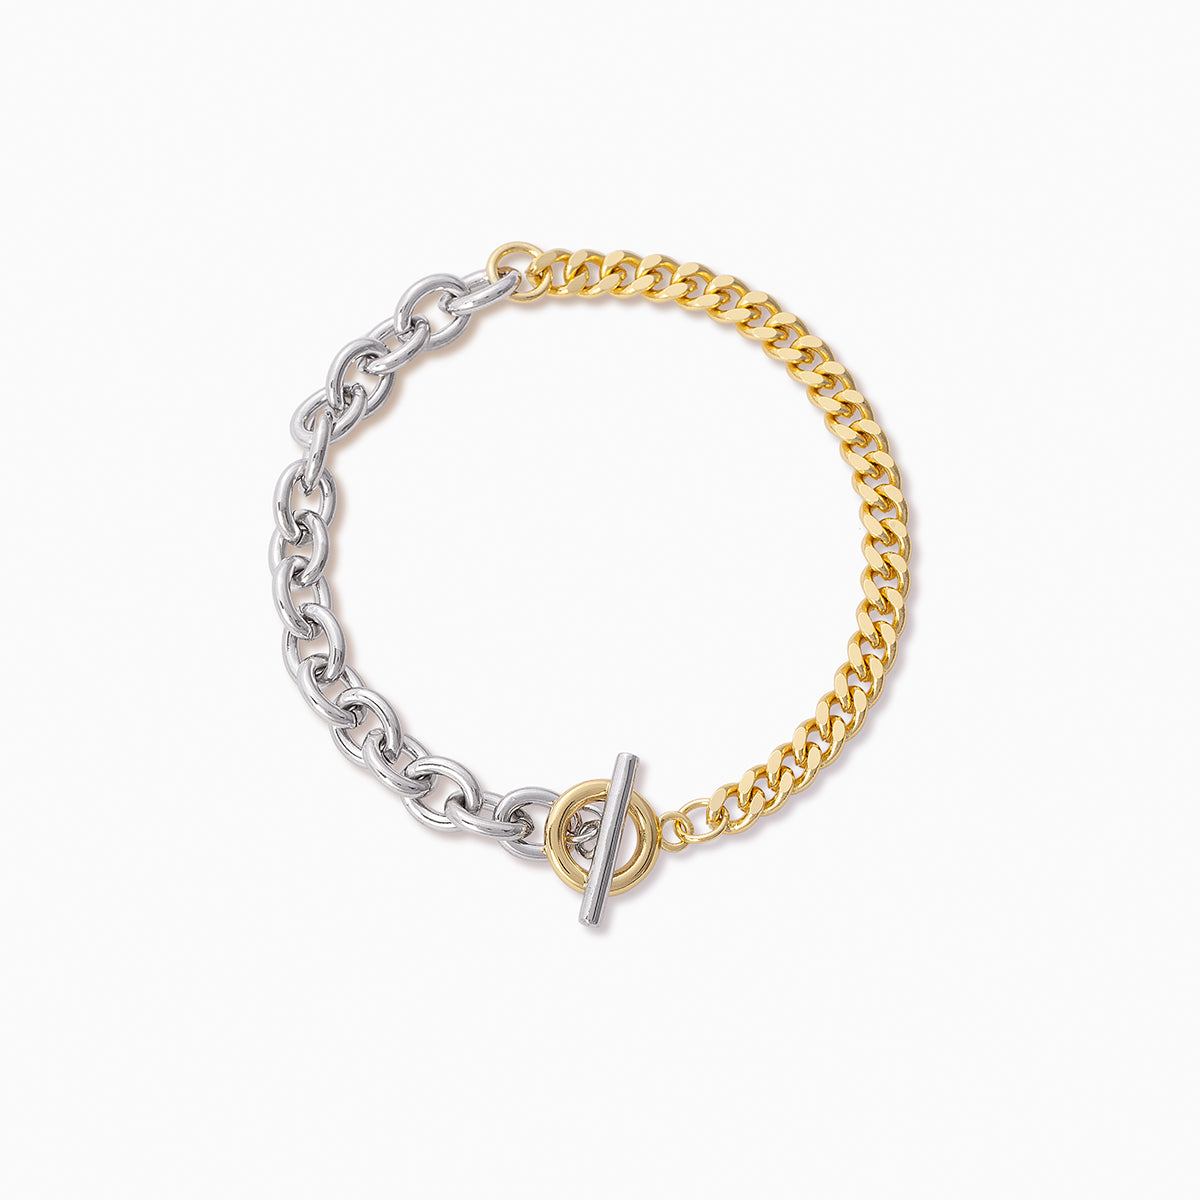 Mixed Up Bracelet | Mixed Metal | Product Image | Uncommon James